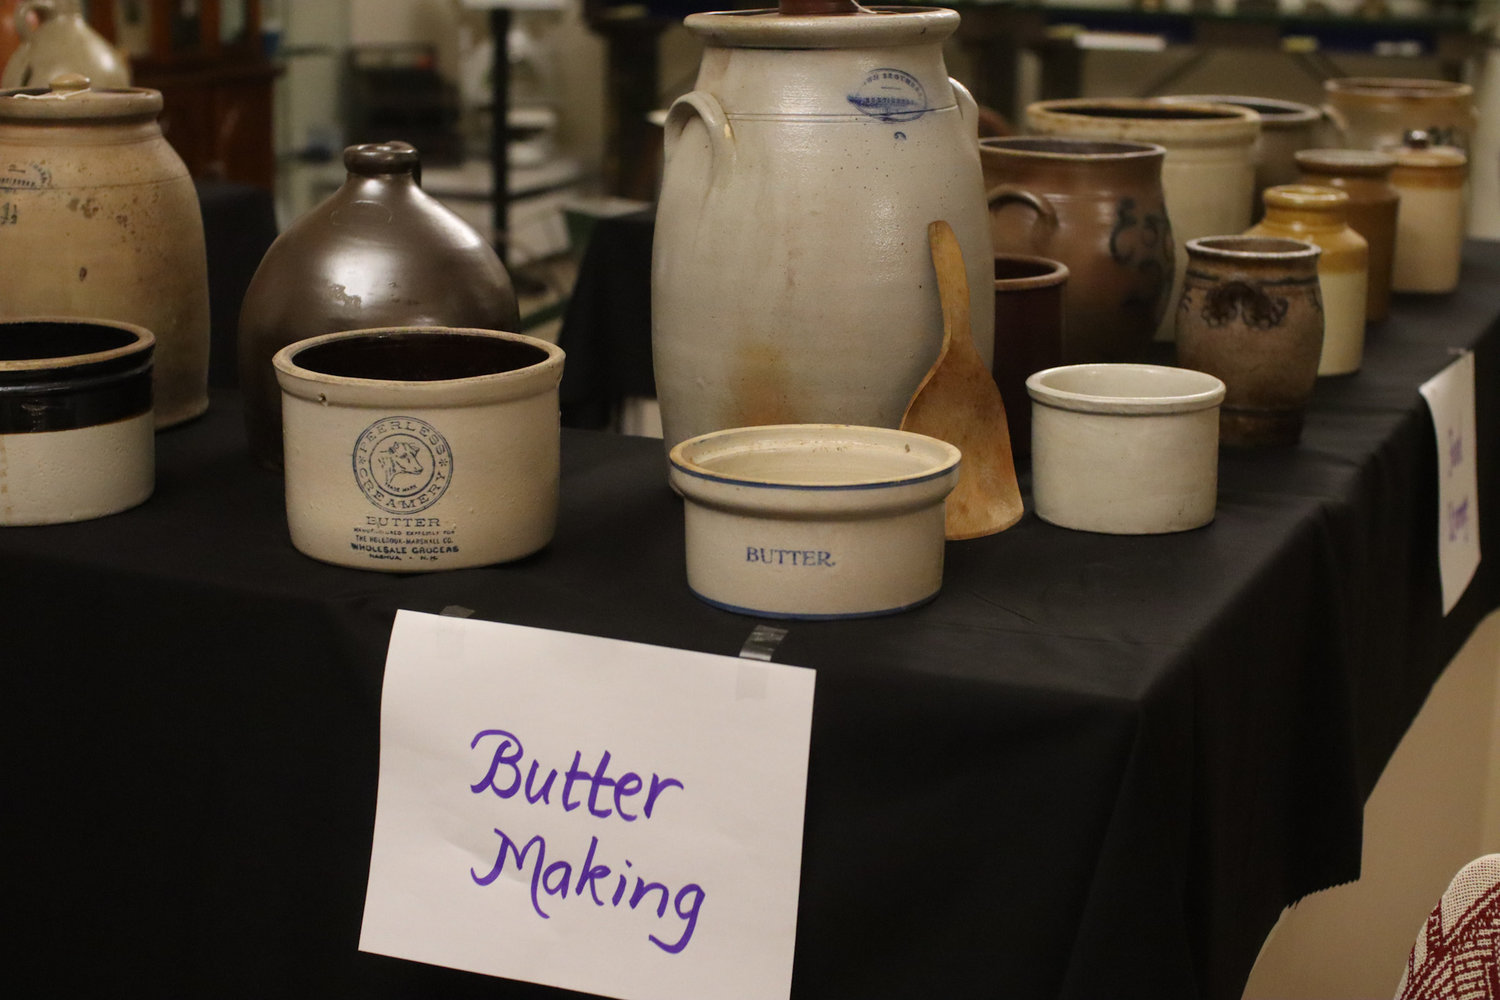 Historic butter making pottery showcased at the museum.